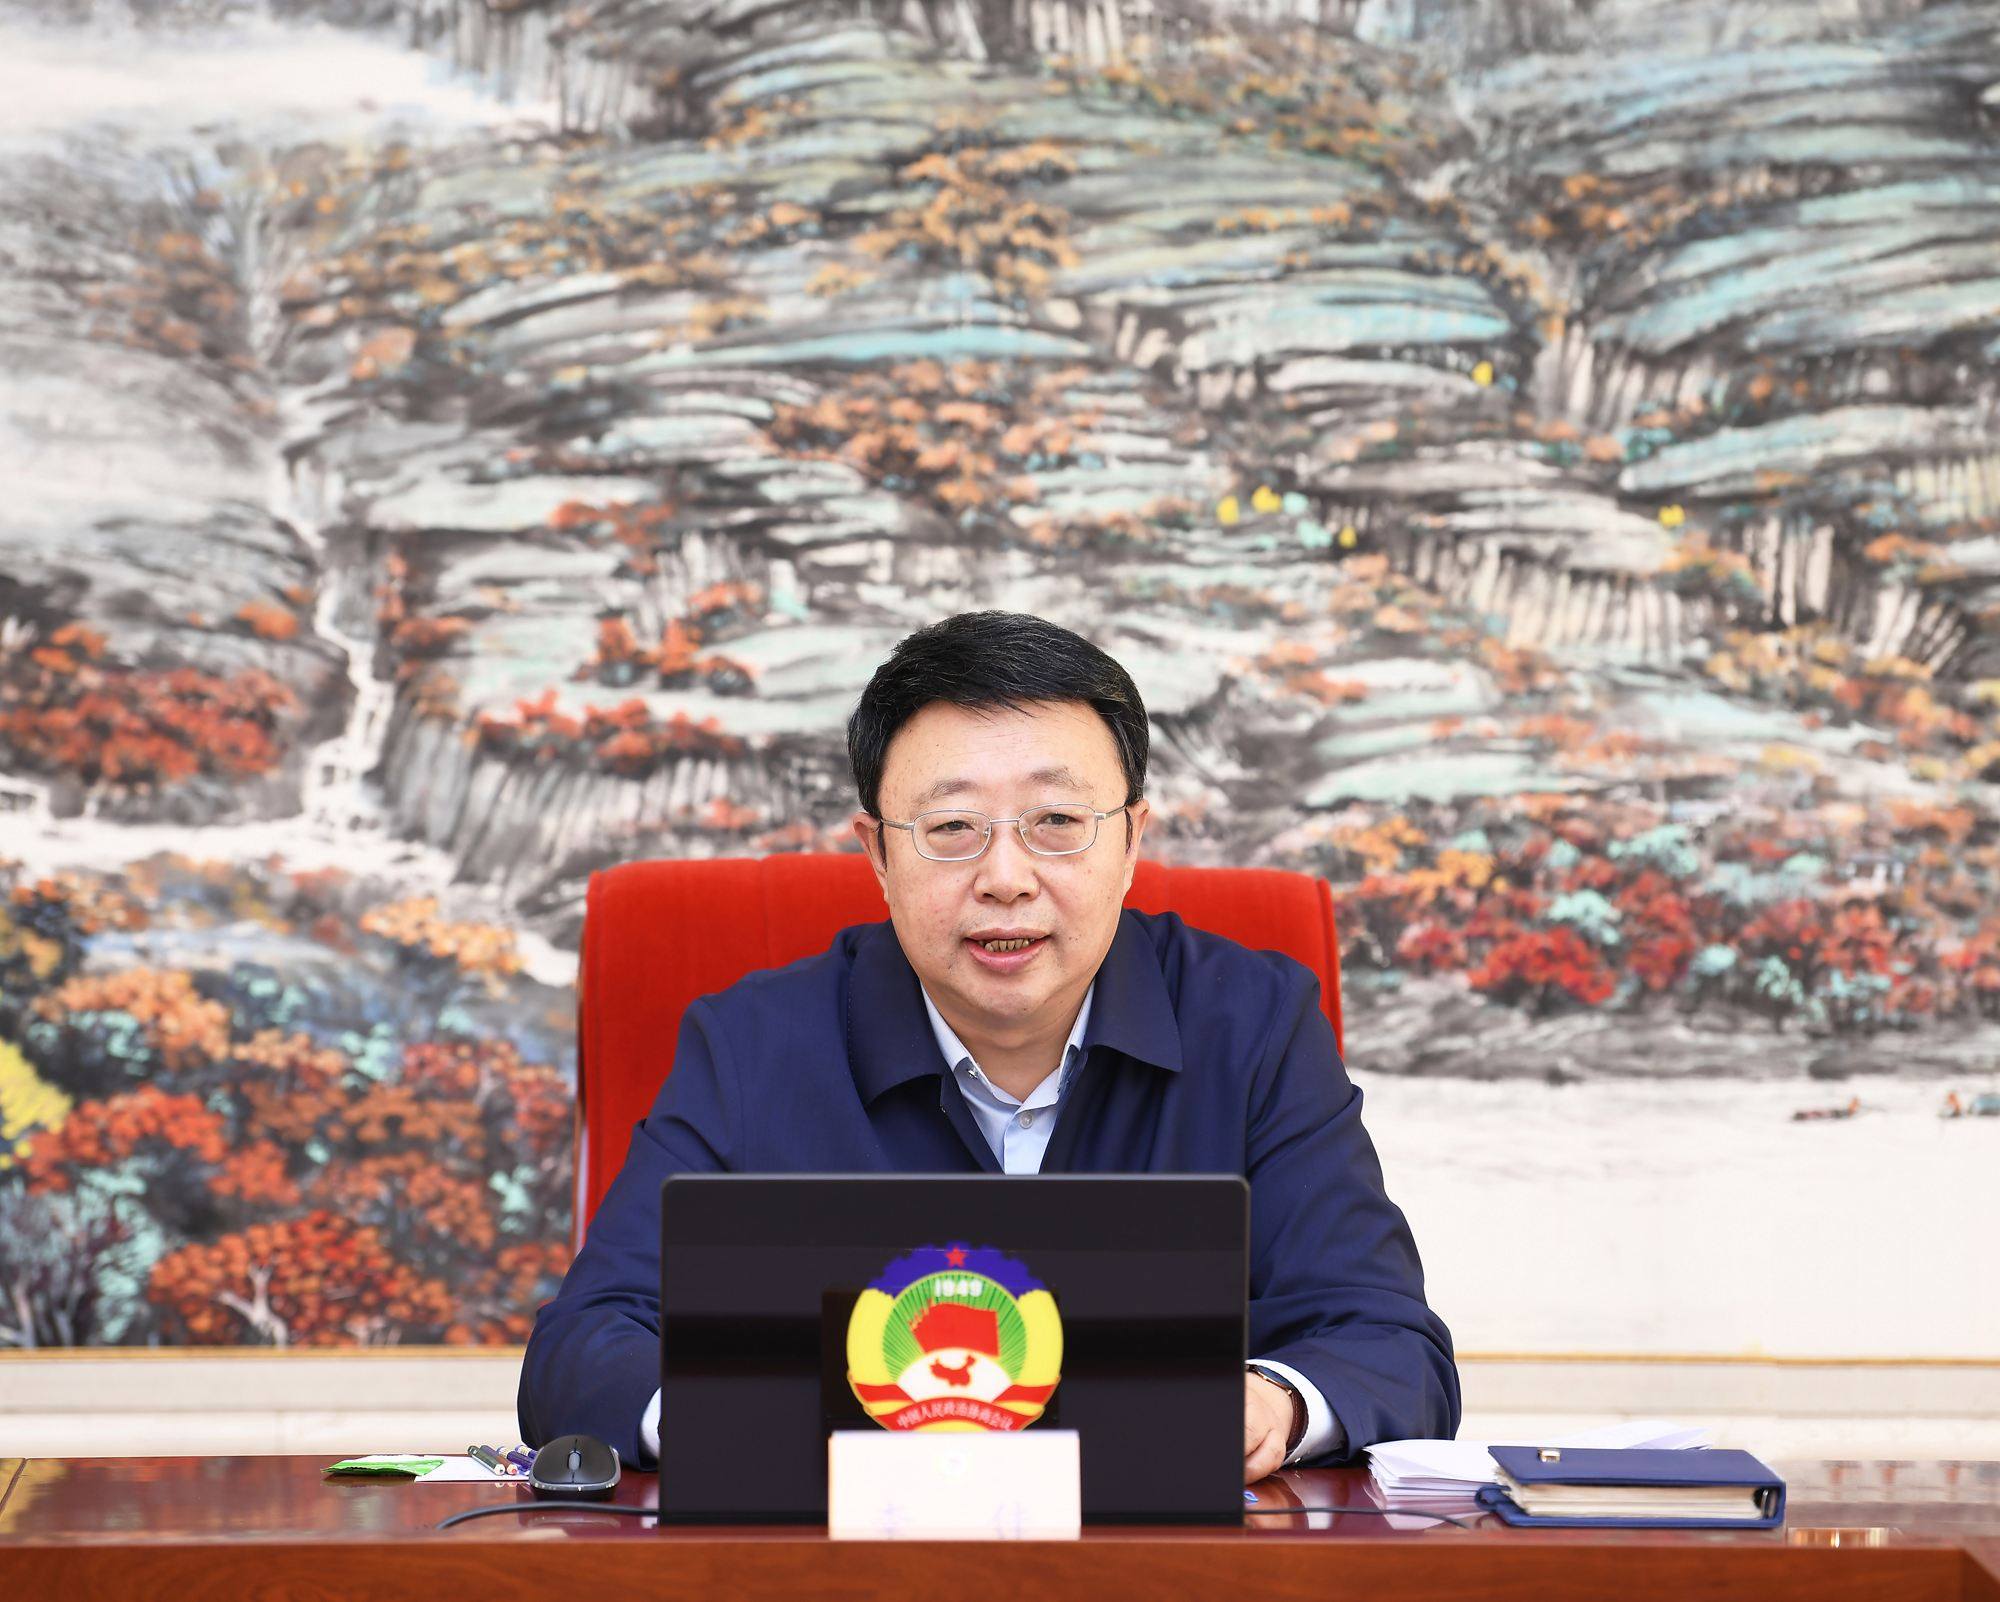 Li Jia, former head of Shanxi’s political advisory body, lost his party titles and was demoted from ministerial to vice-ministerial level in the government system. Photo: Handout